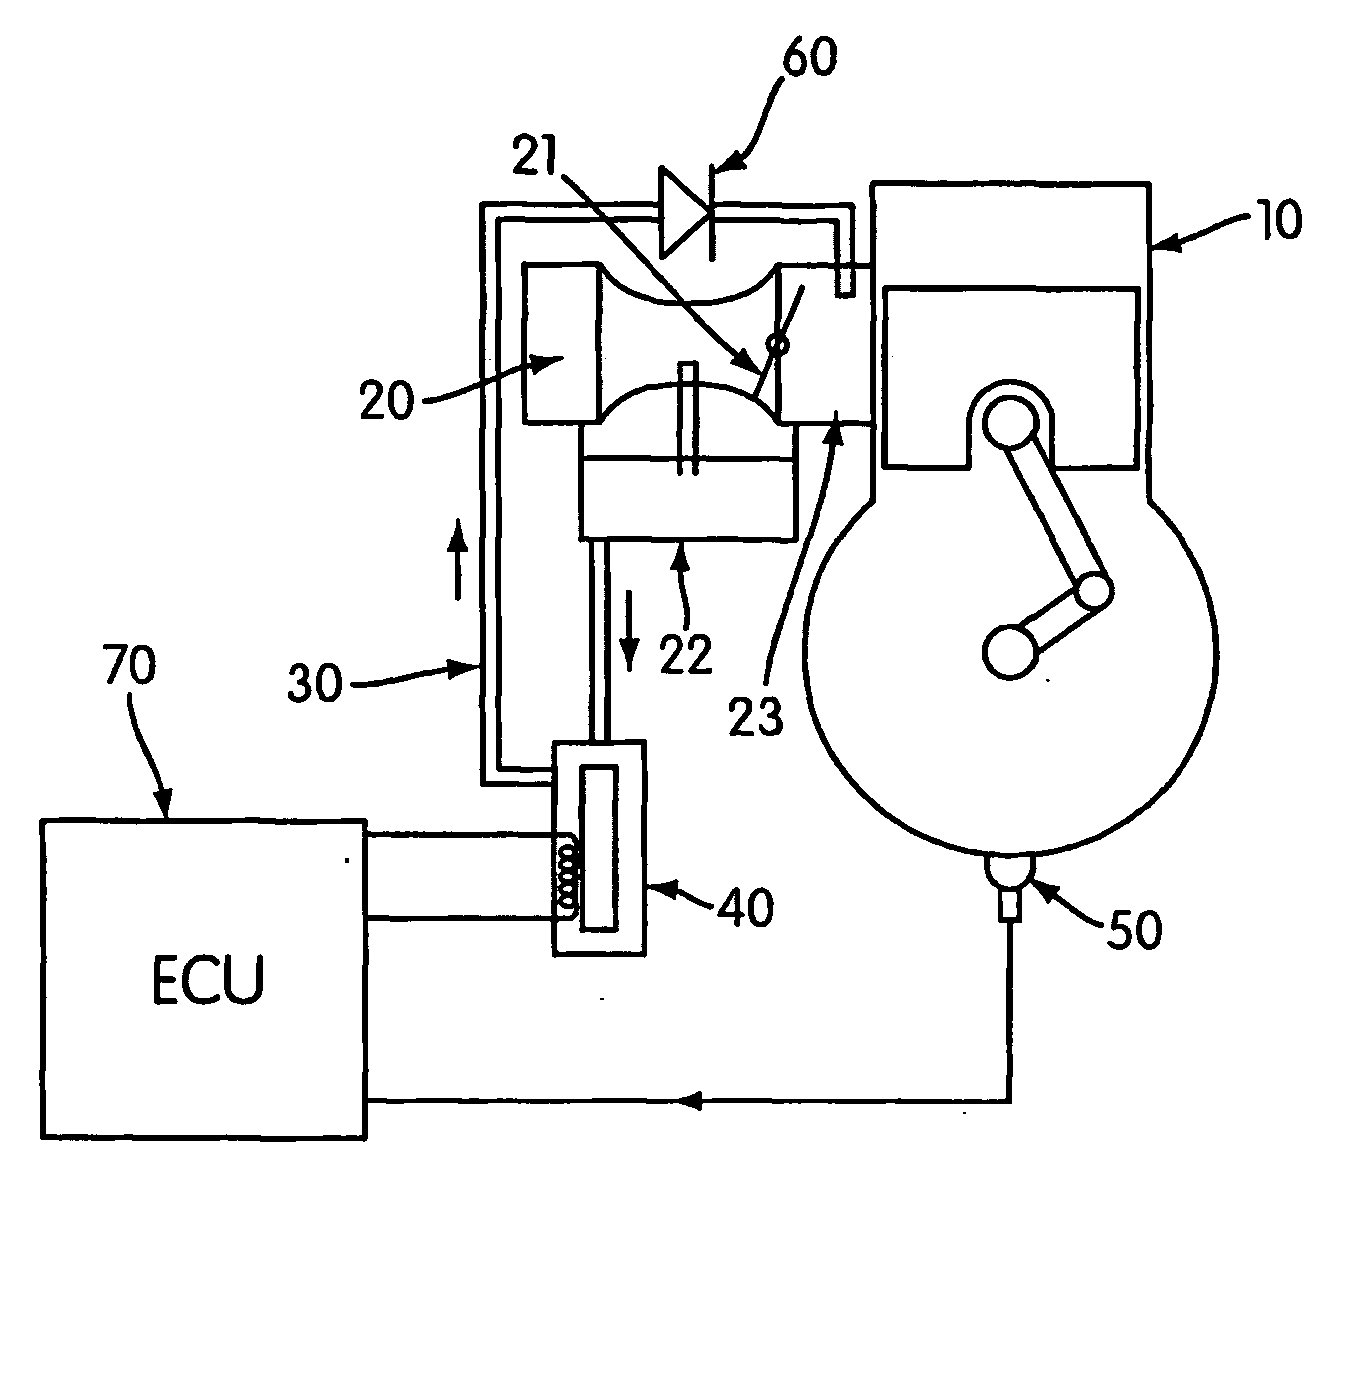 Systems and methods for automatic carburetor enrichment during cold start